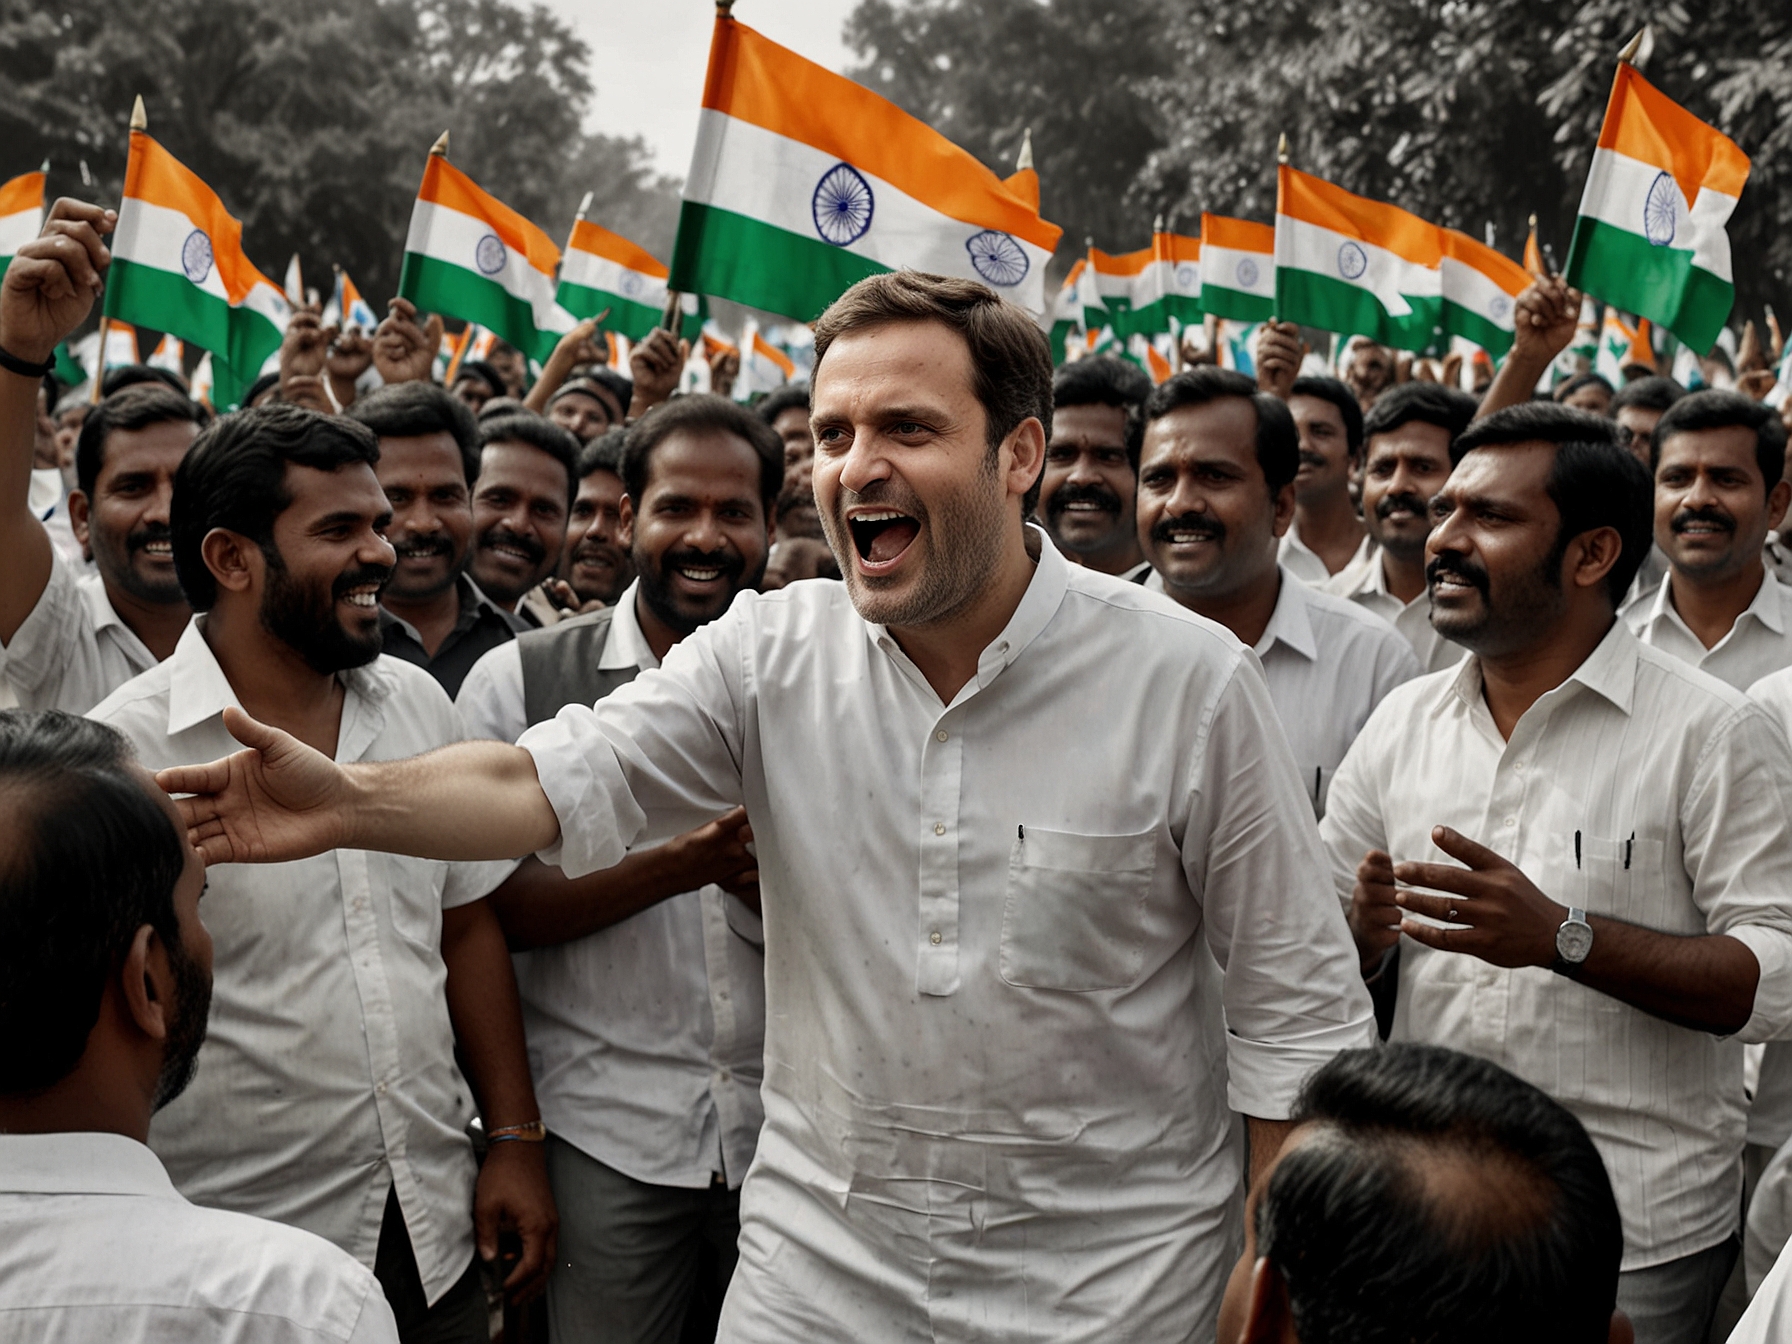 Rahul Gandhi celebrates his electoral victory in Raebareli and Wayanad, surrounded by supporters displaying banners and flags, highlighting his continued influence in diverse regions.